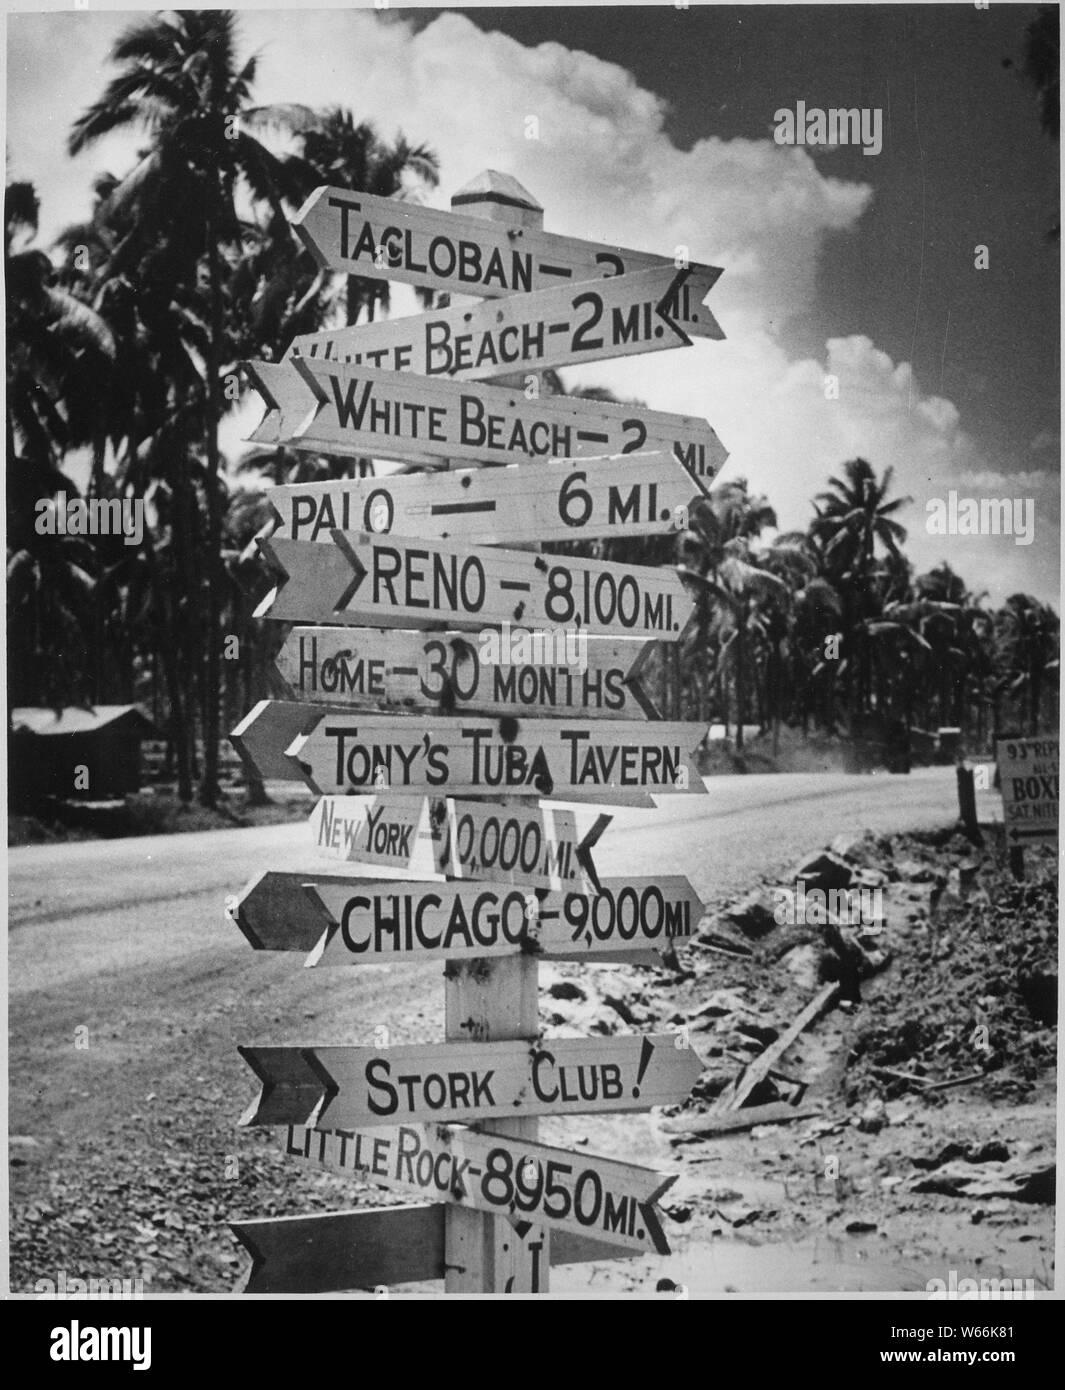 It doesn't seem to matter where the war has carried the GI. He retains a keen sense of humor and an equally sharp yearning for home. Signpost at a crossroads in Tacloban on Leyte reflects Joe's love of a gag and names and places he misses.; General notes:  Use War and Conflict Number 1213 when ordering a reproduction or requesting information about this image. Stock Photo